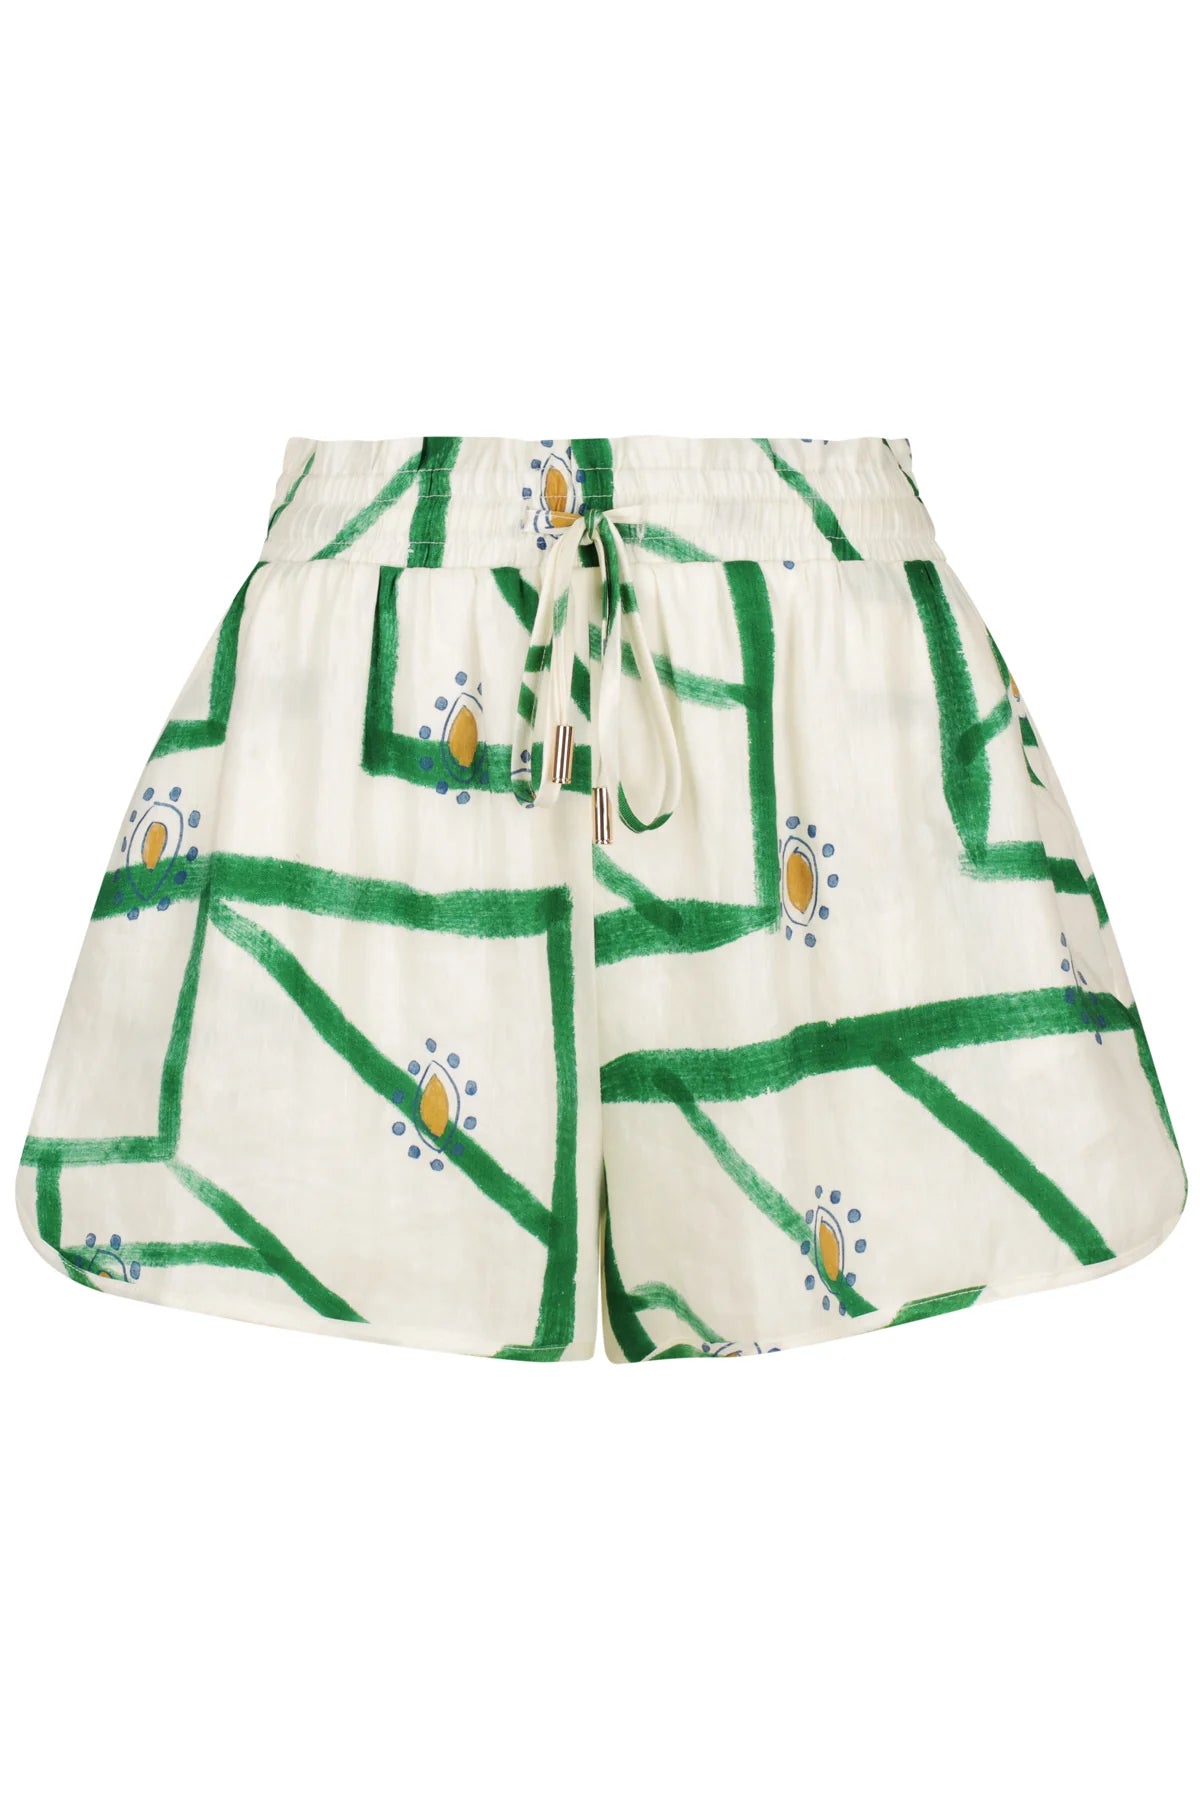 White shorts with a green and gold design with elasticated waist